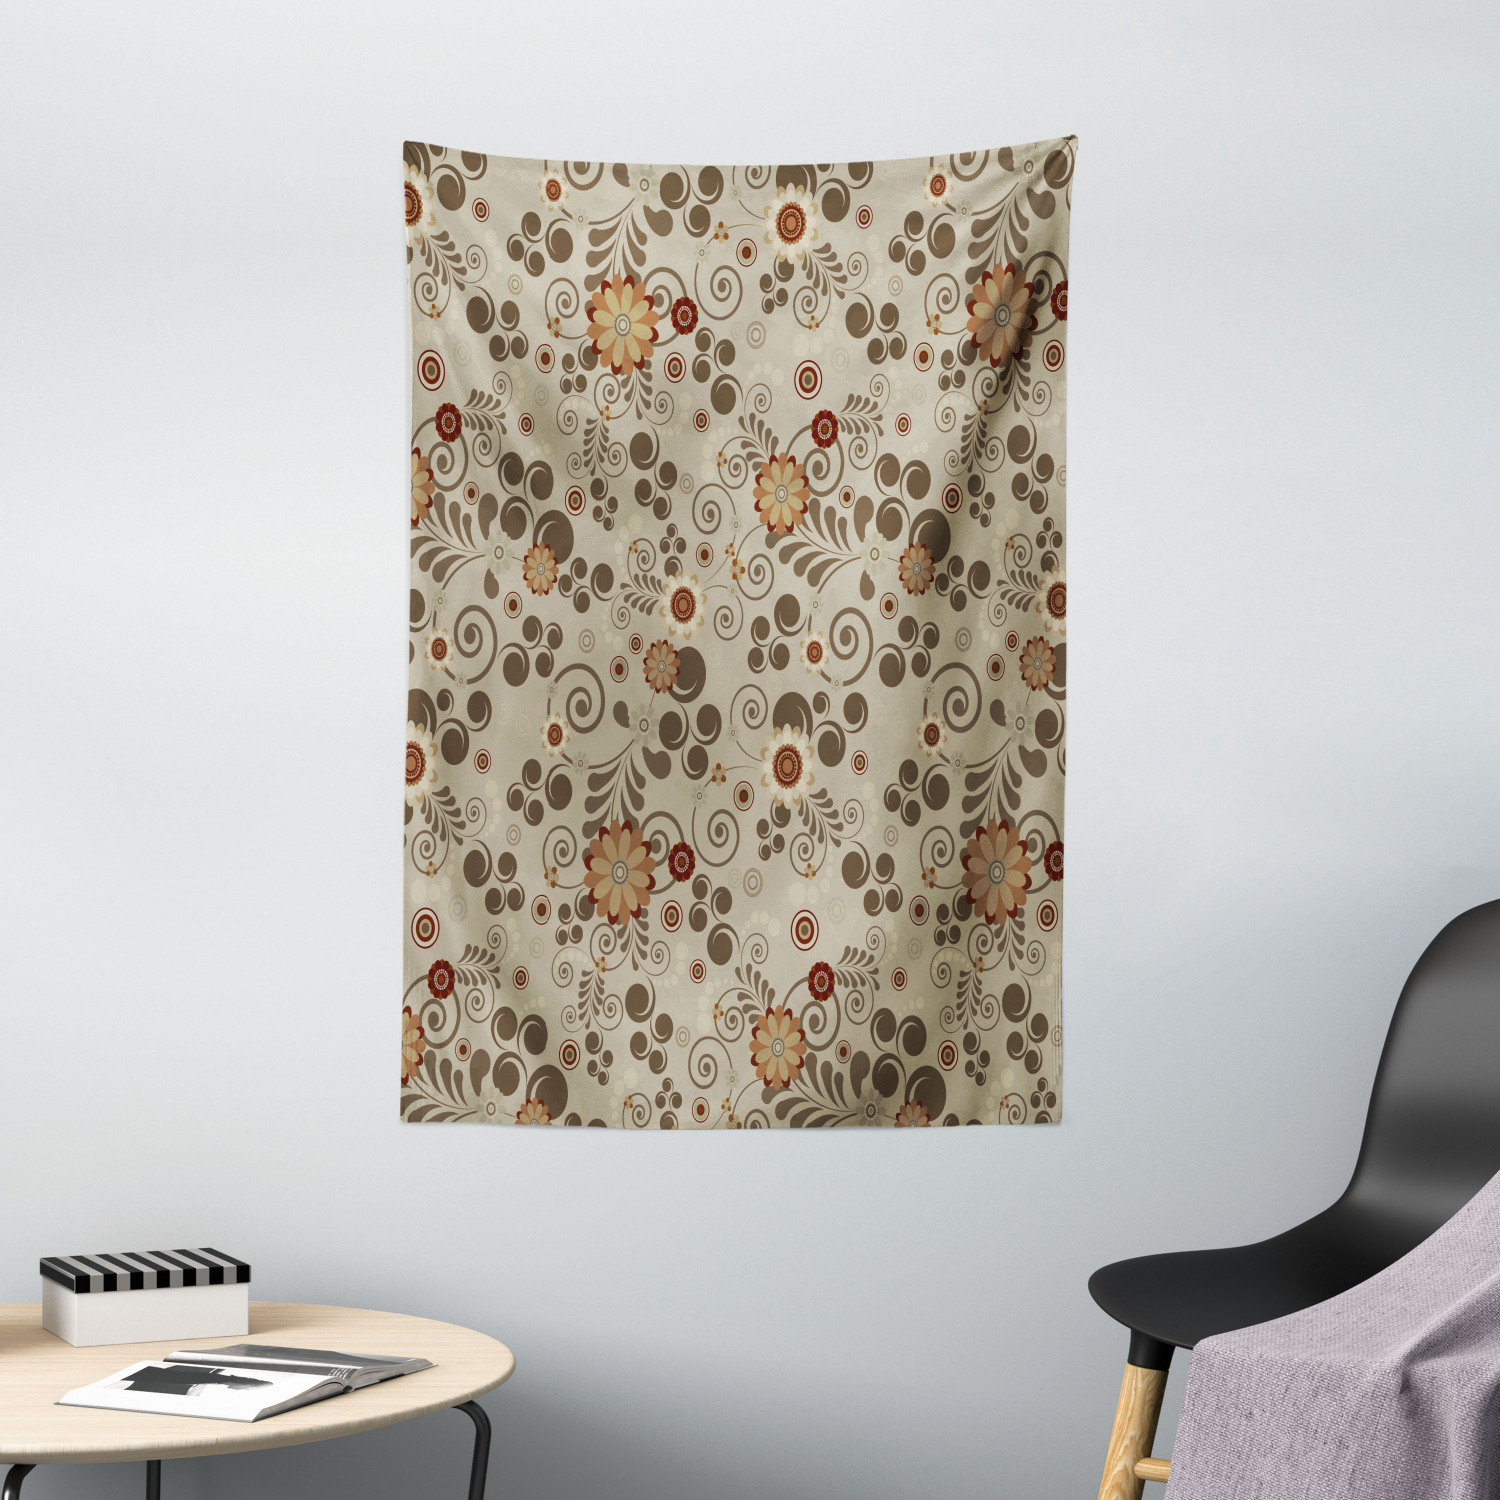 Grunge Tapestry Swirls Curves and Dots Print Wall Hanging Decor | eBay